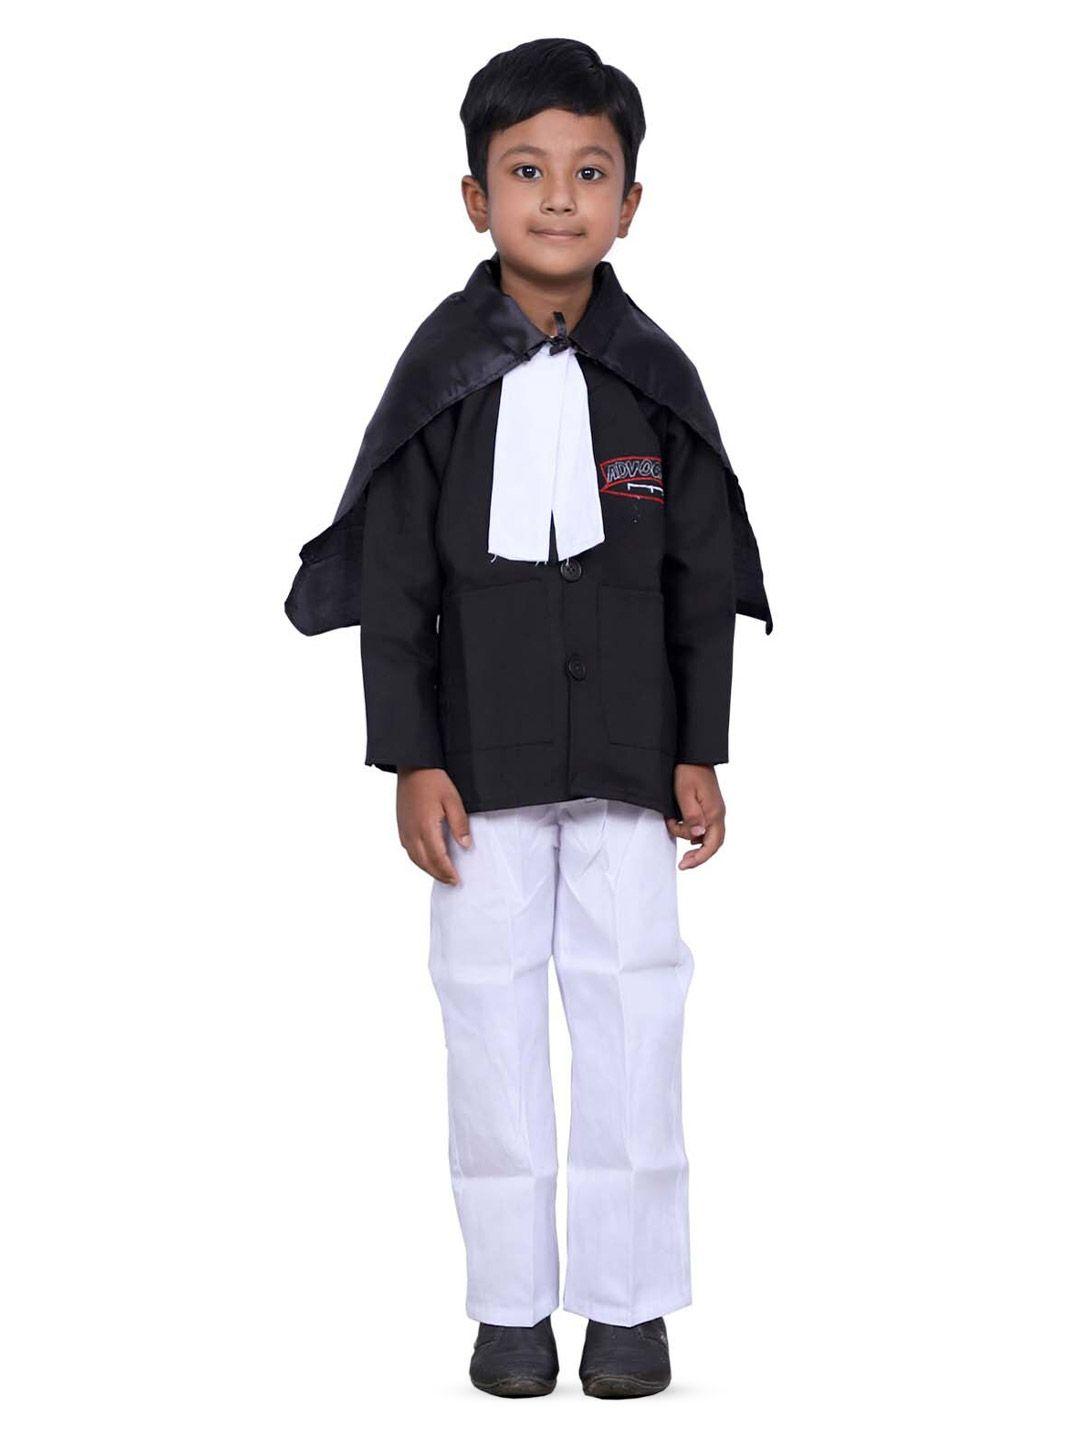 baesd kids advocate costume shirt with trousers